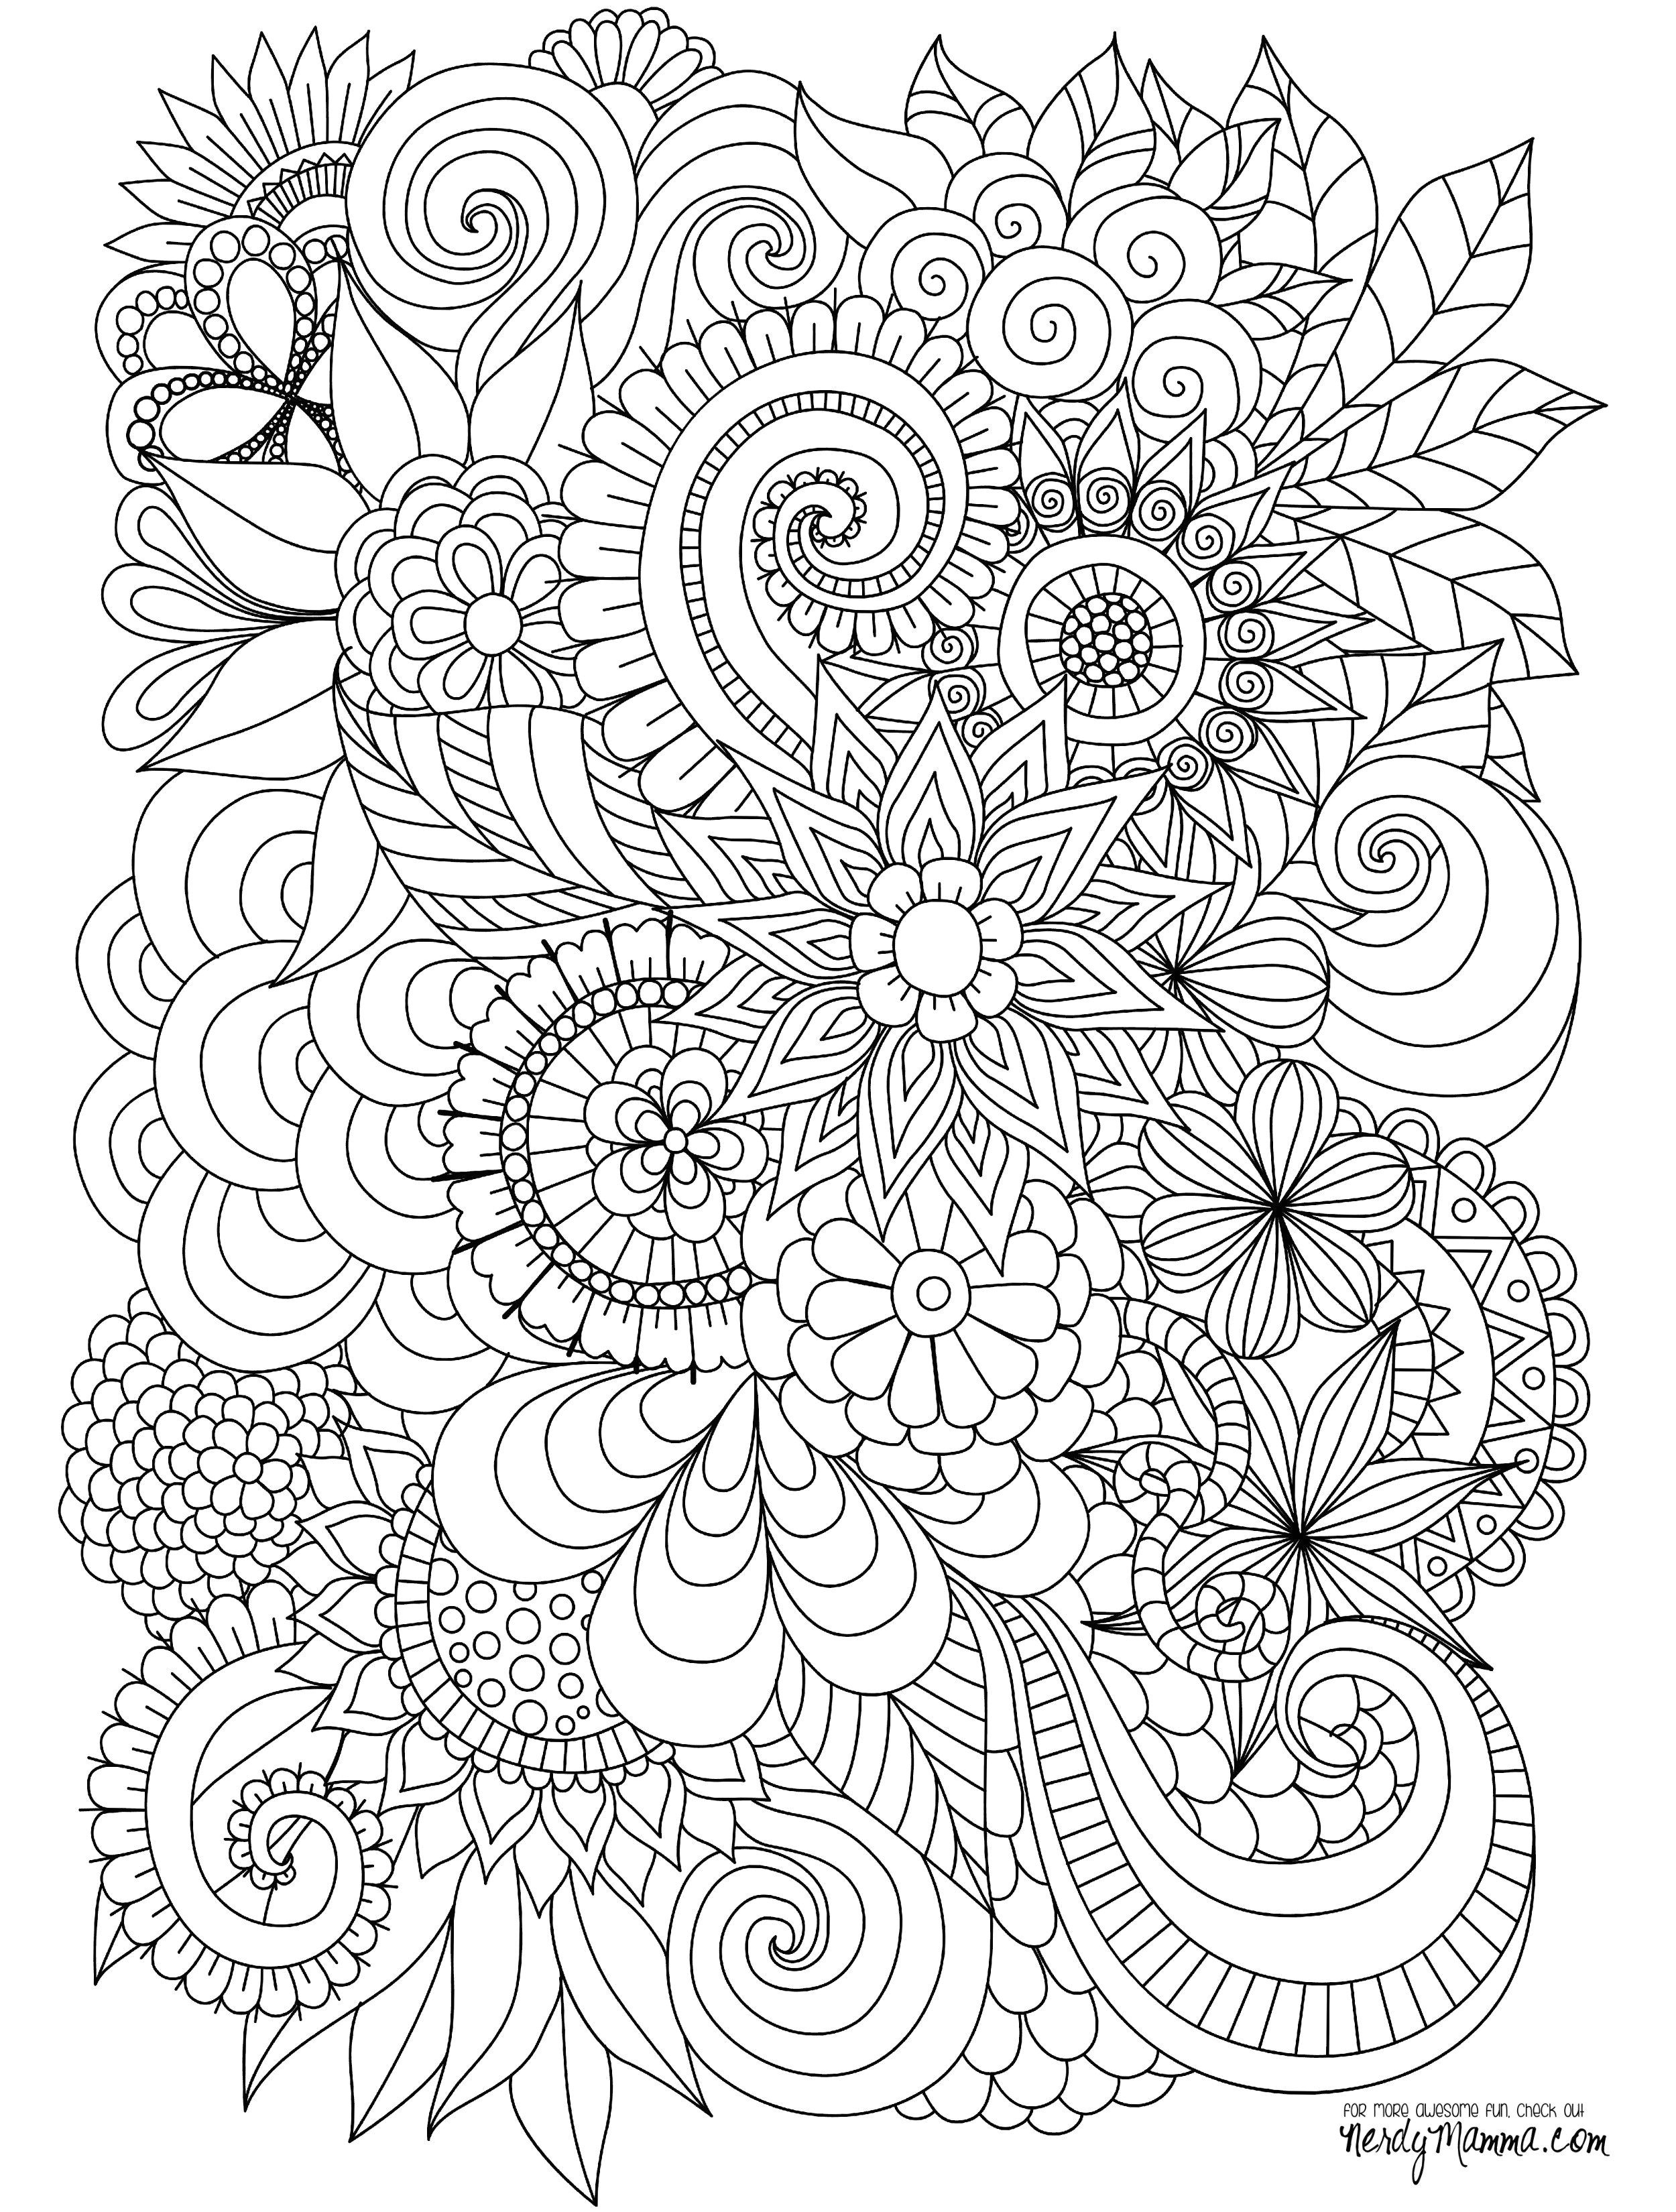 Flowers Abstract Coloring pages colouring adult detailed advanced printable Kleuren voor volwassenen coloriage pour adulte anti